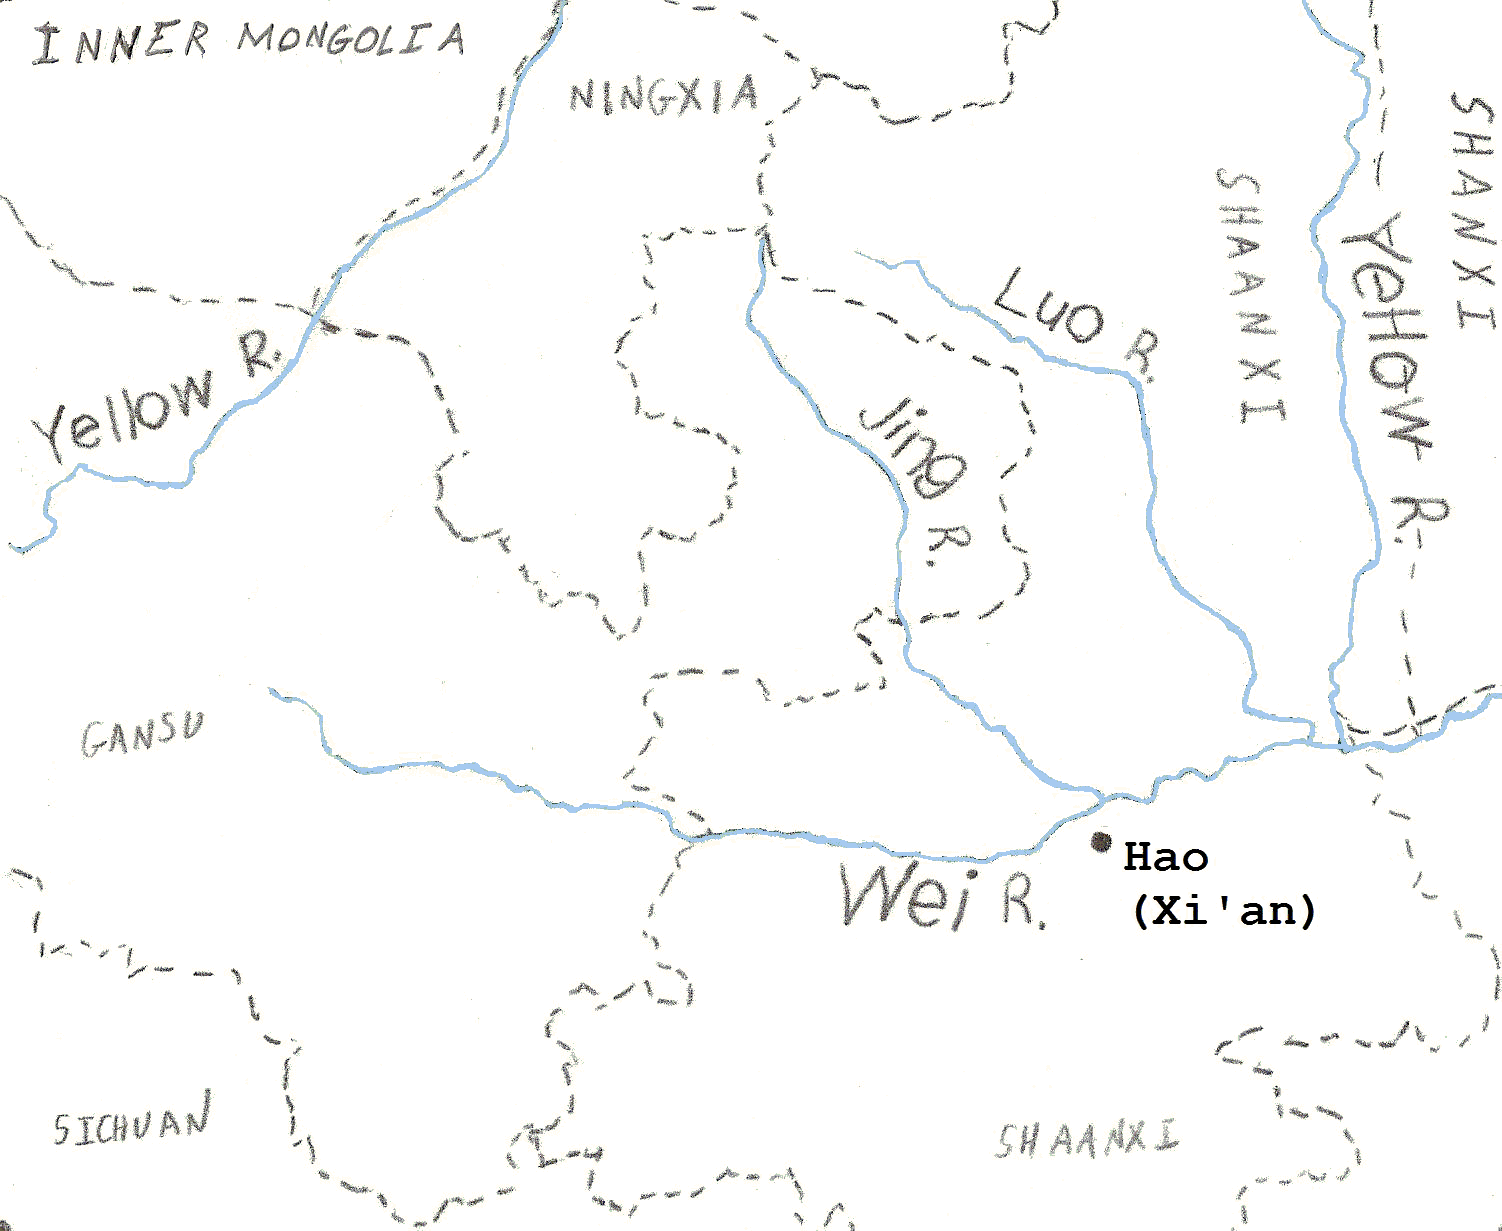 Map of Jing, Luo, and Wei Rivers.